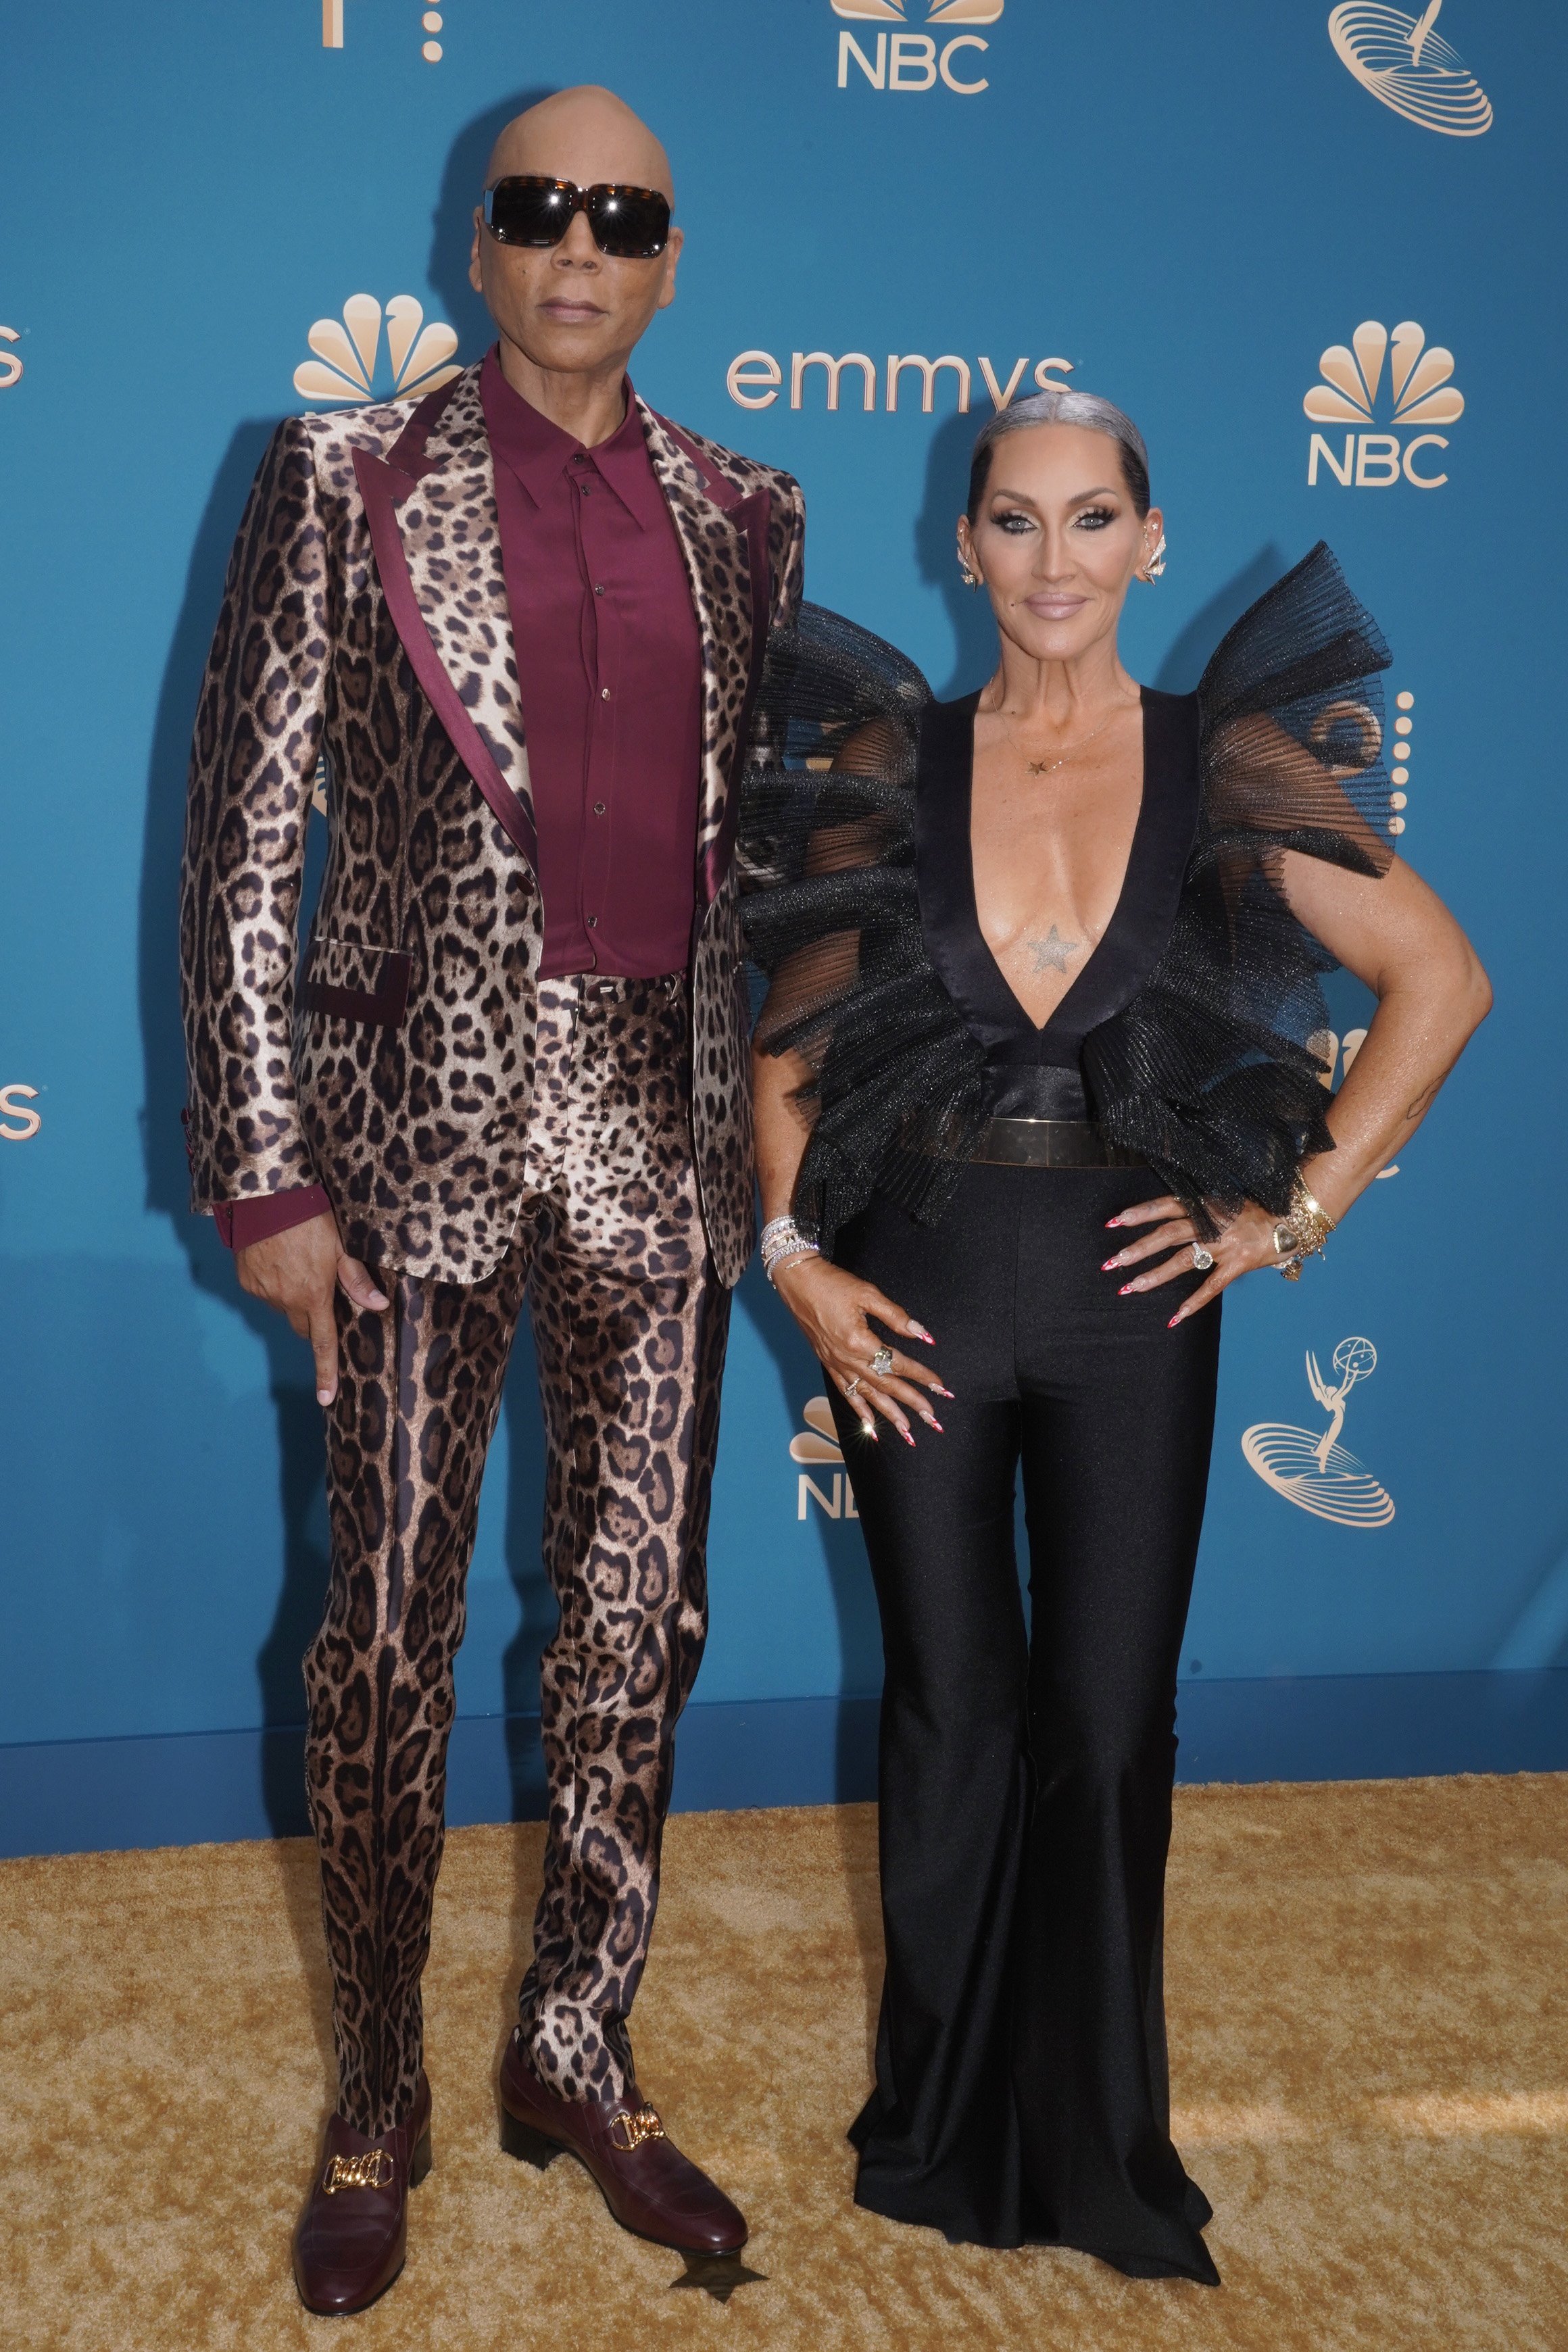 RuPaul and Michelle Visage at the 74th Annual Primetime Emmy Awards on September 12, 2022. | Source: Getty Images